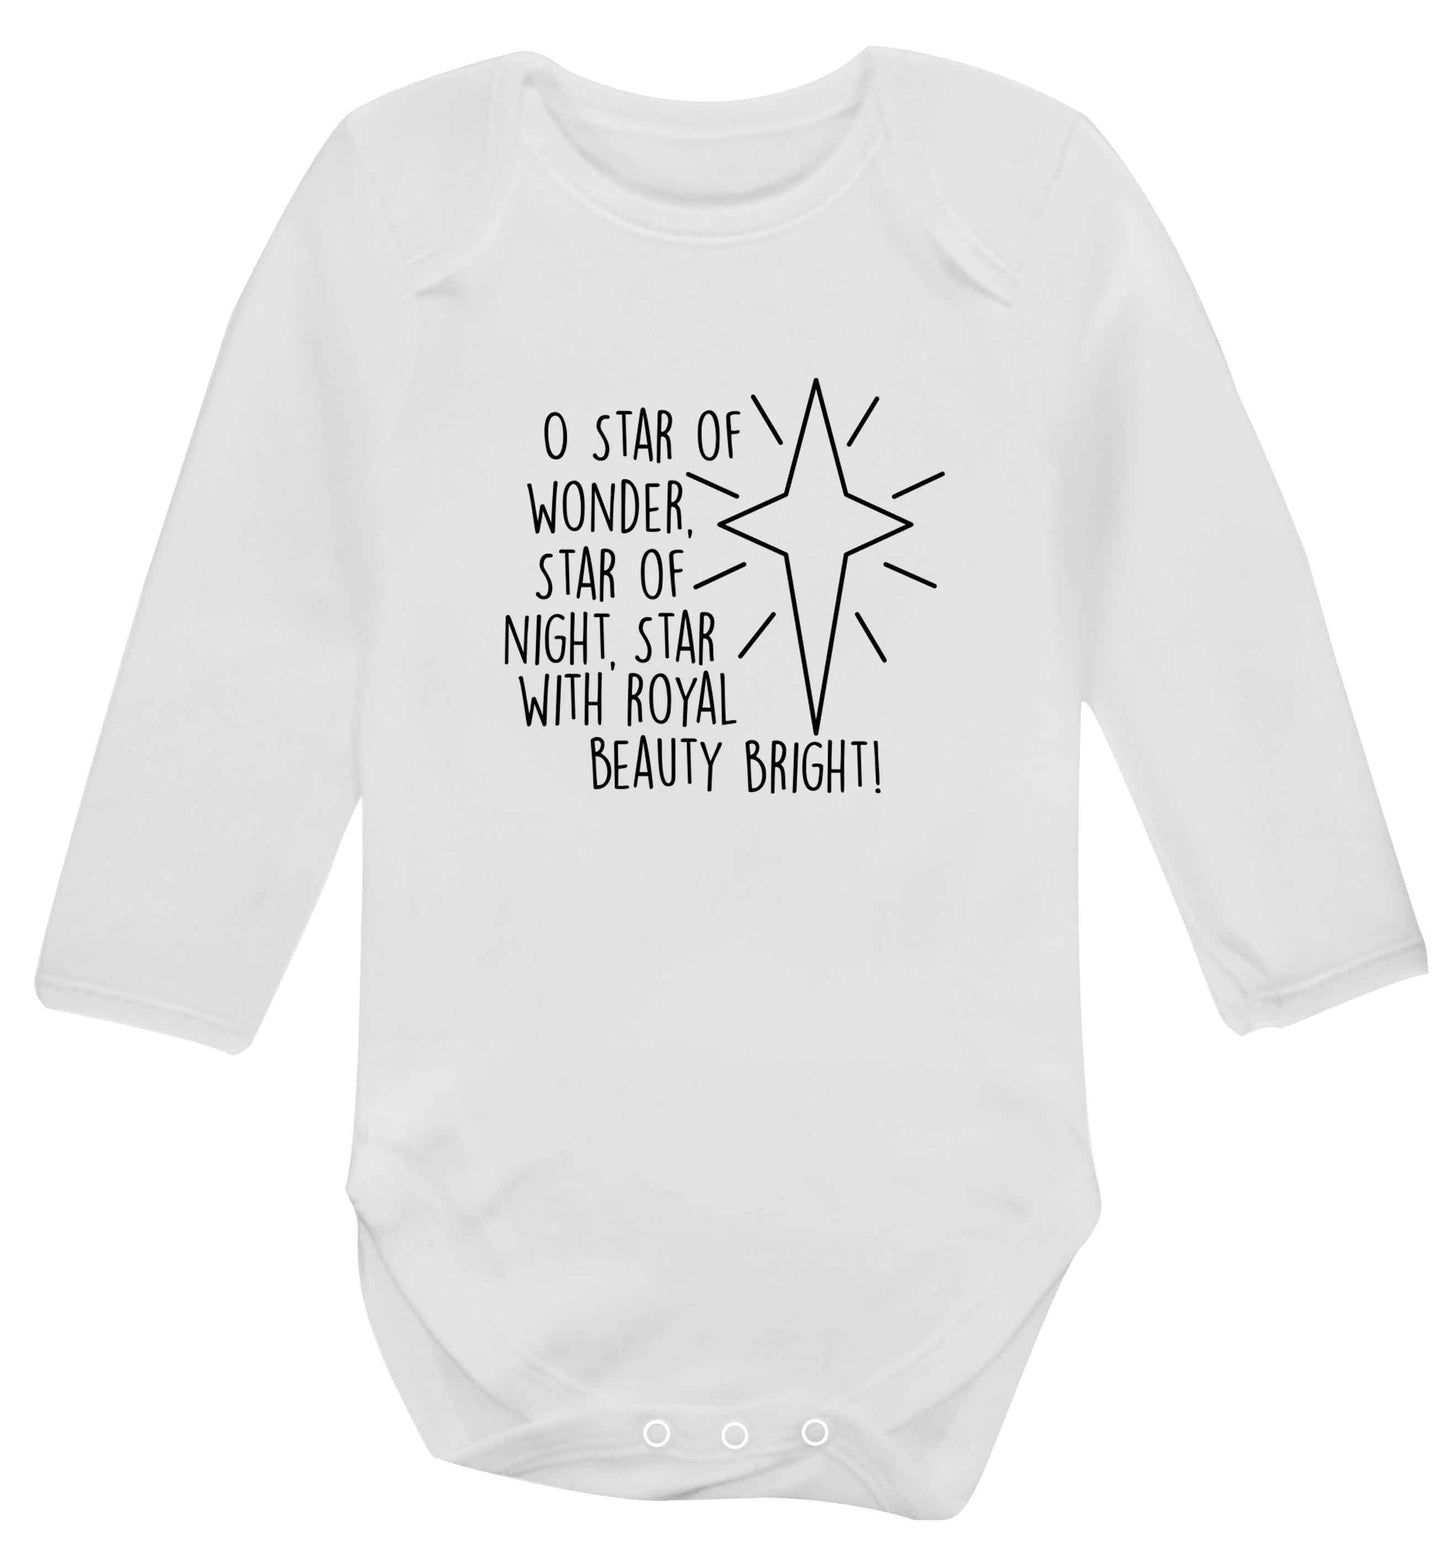 Oh star of wonder star of night, star with royal beauty bright baby vest long sleeved white 6-12 months